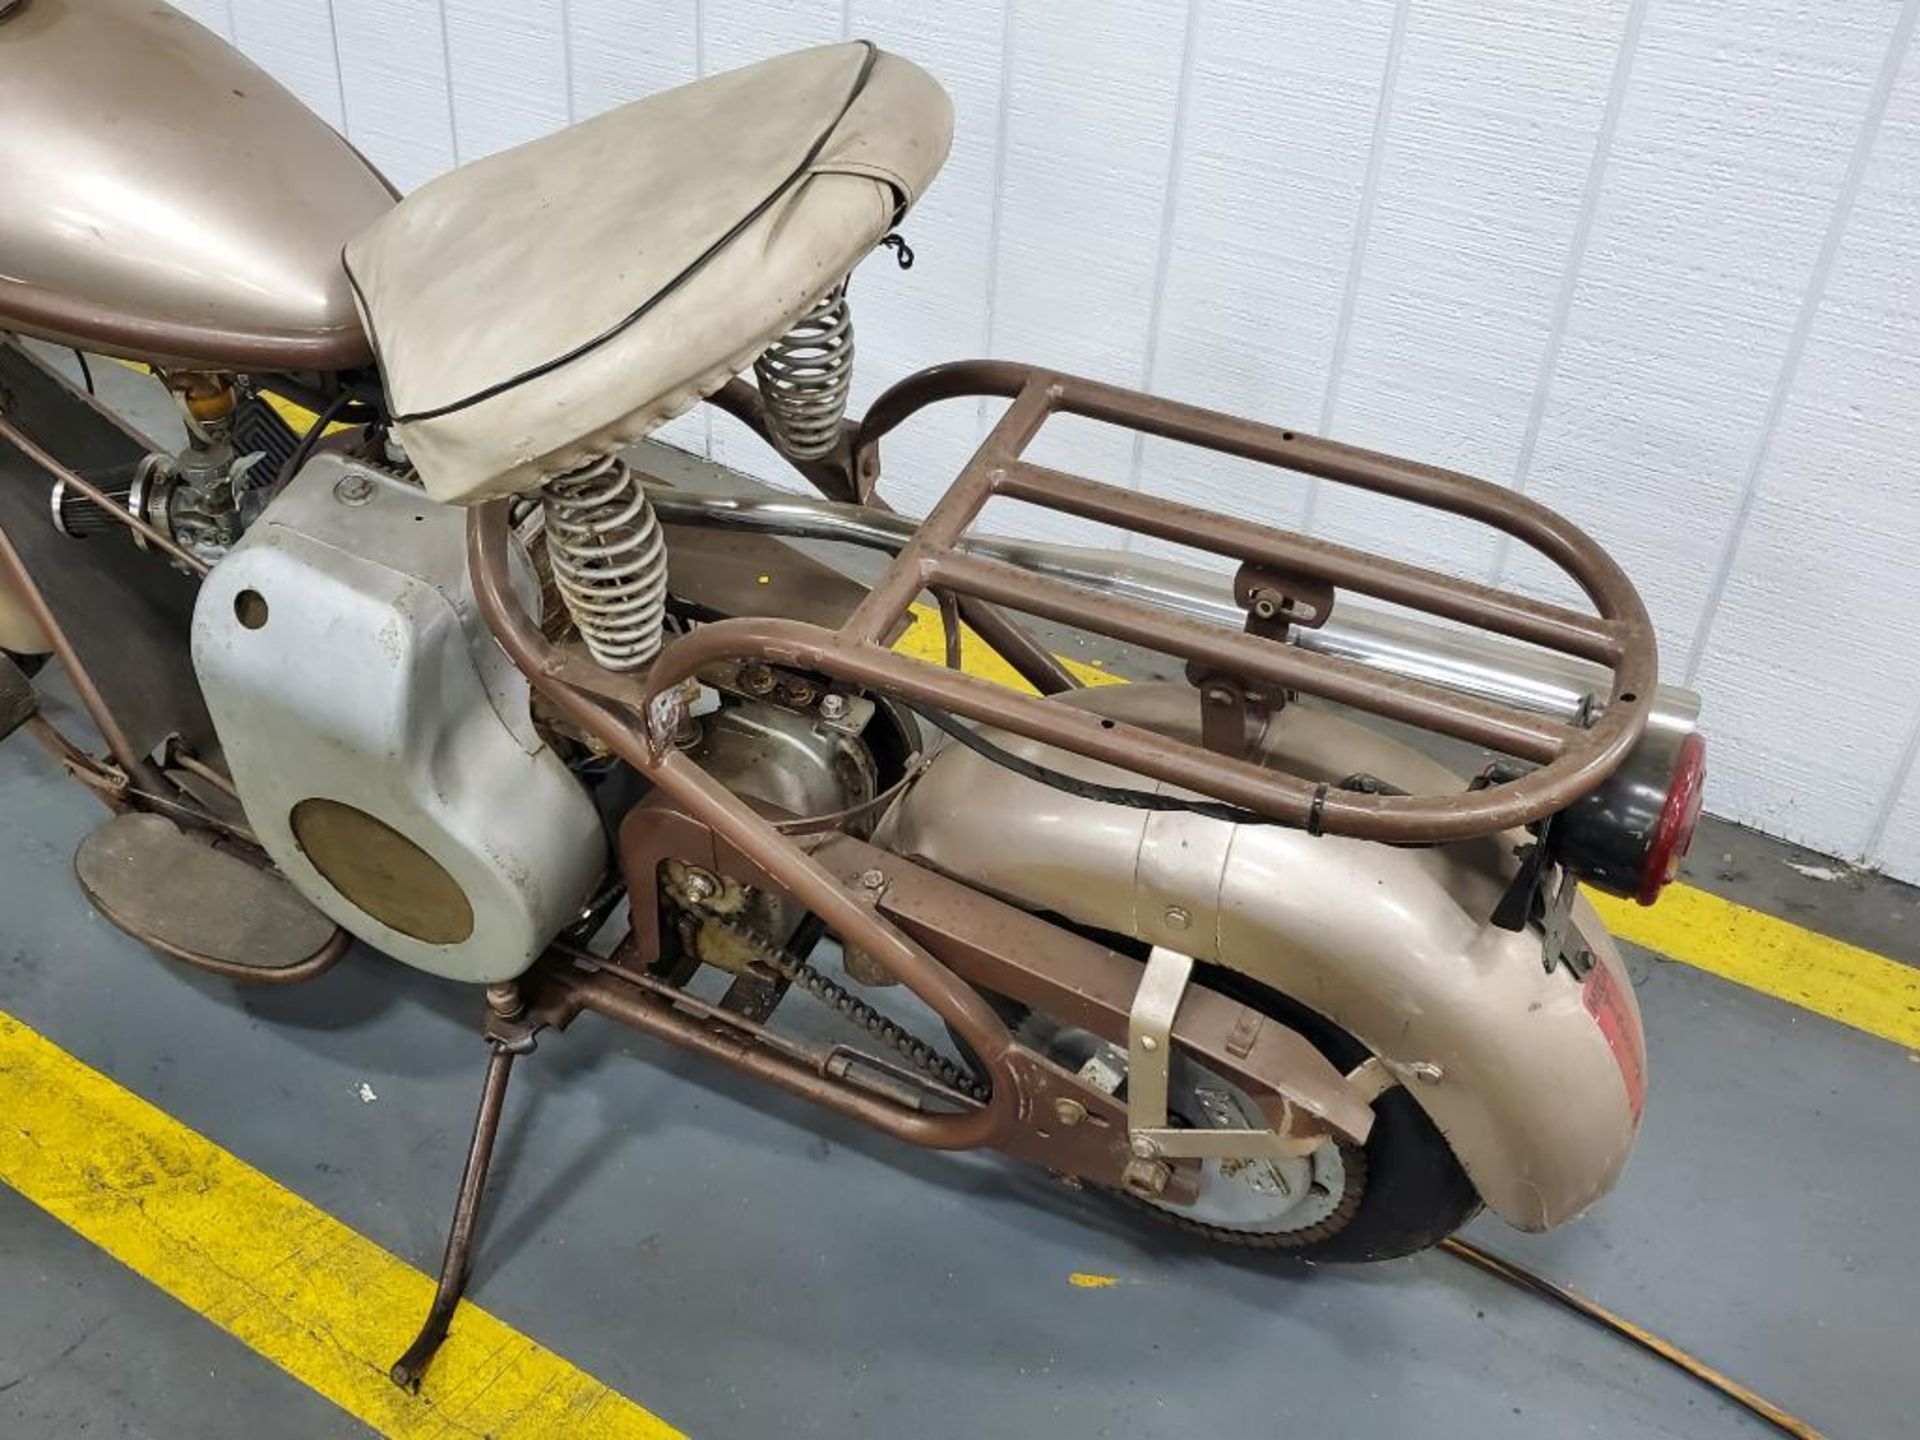 Cushman gas scooter. Said to be from early 1940's. - Image 11 of 12